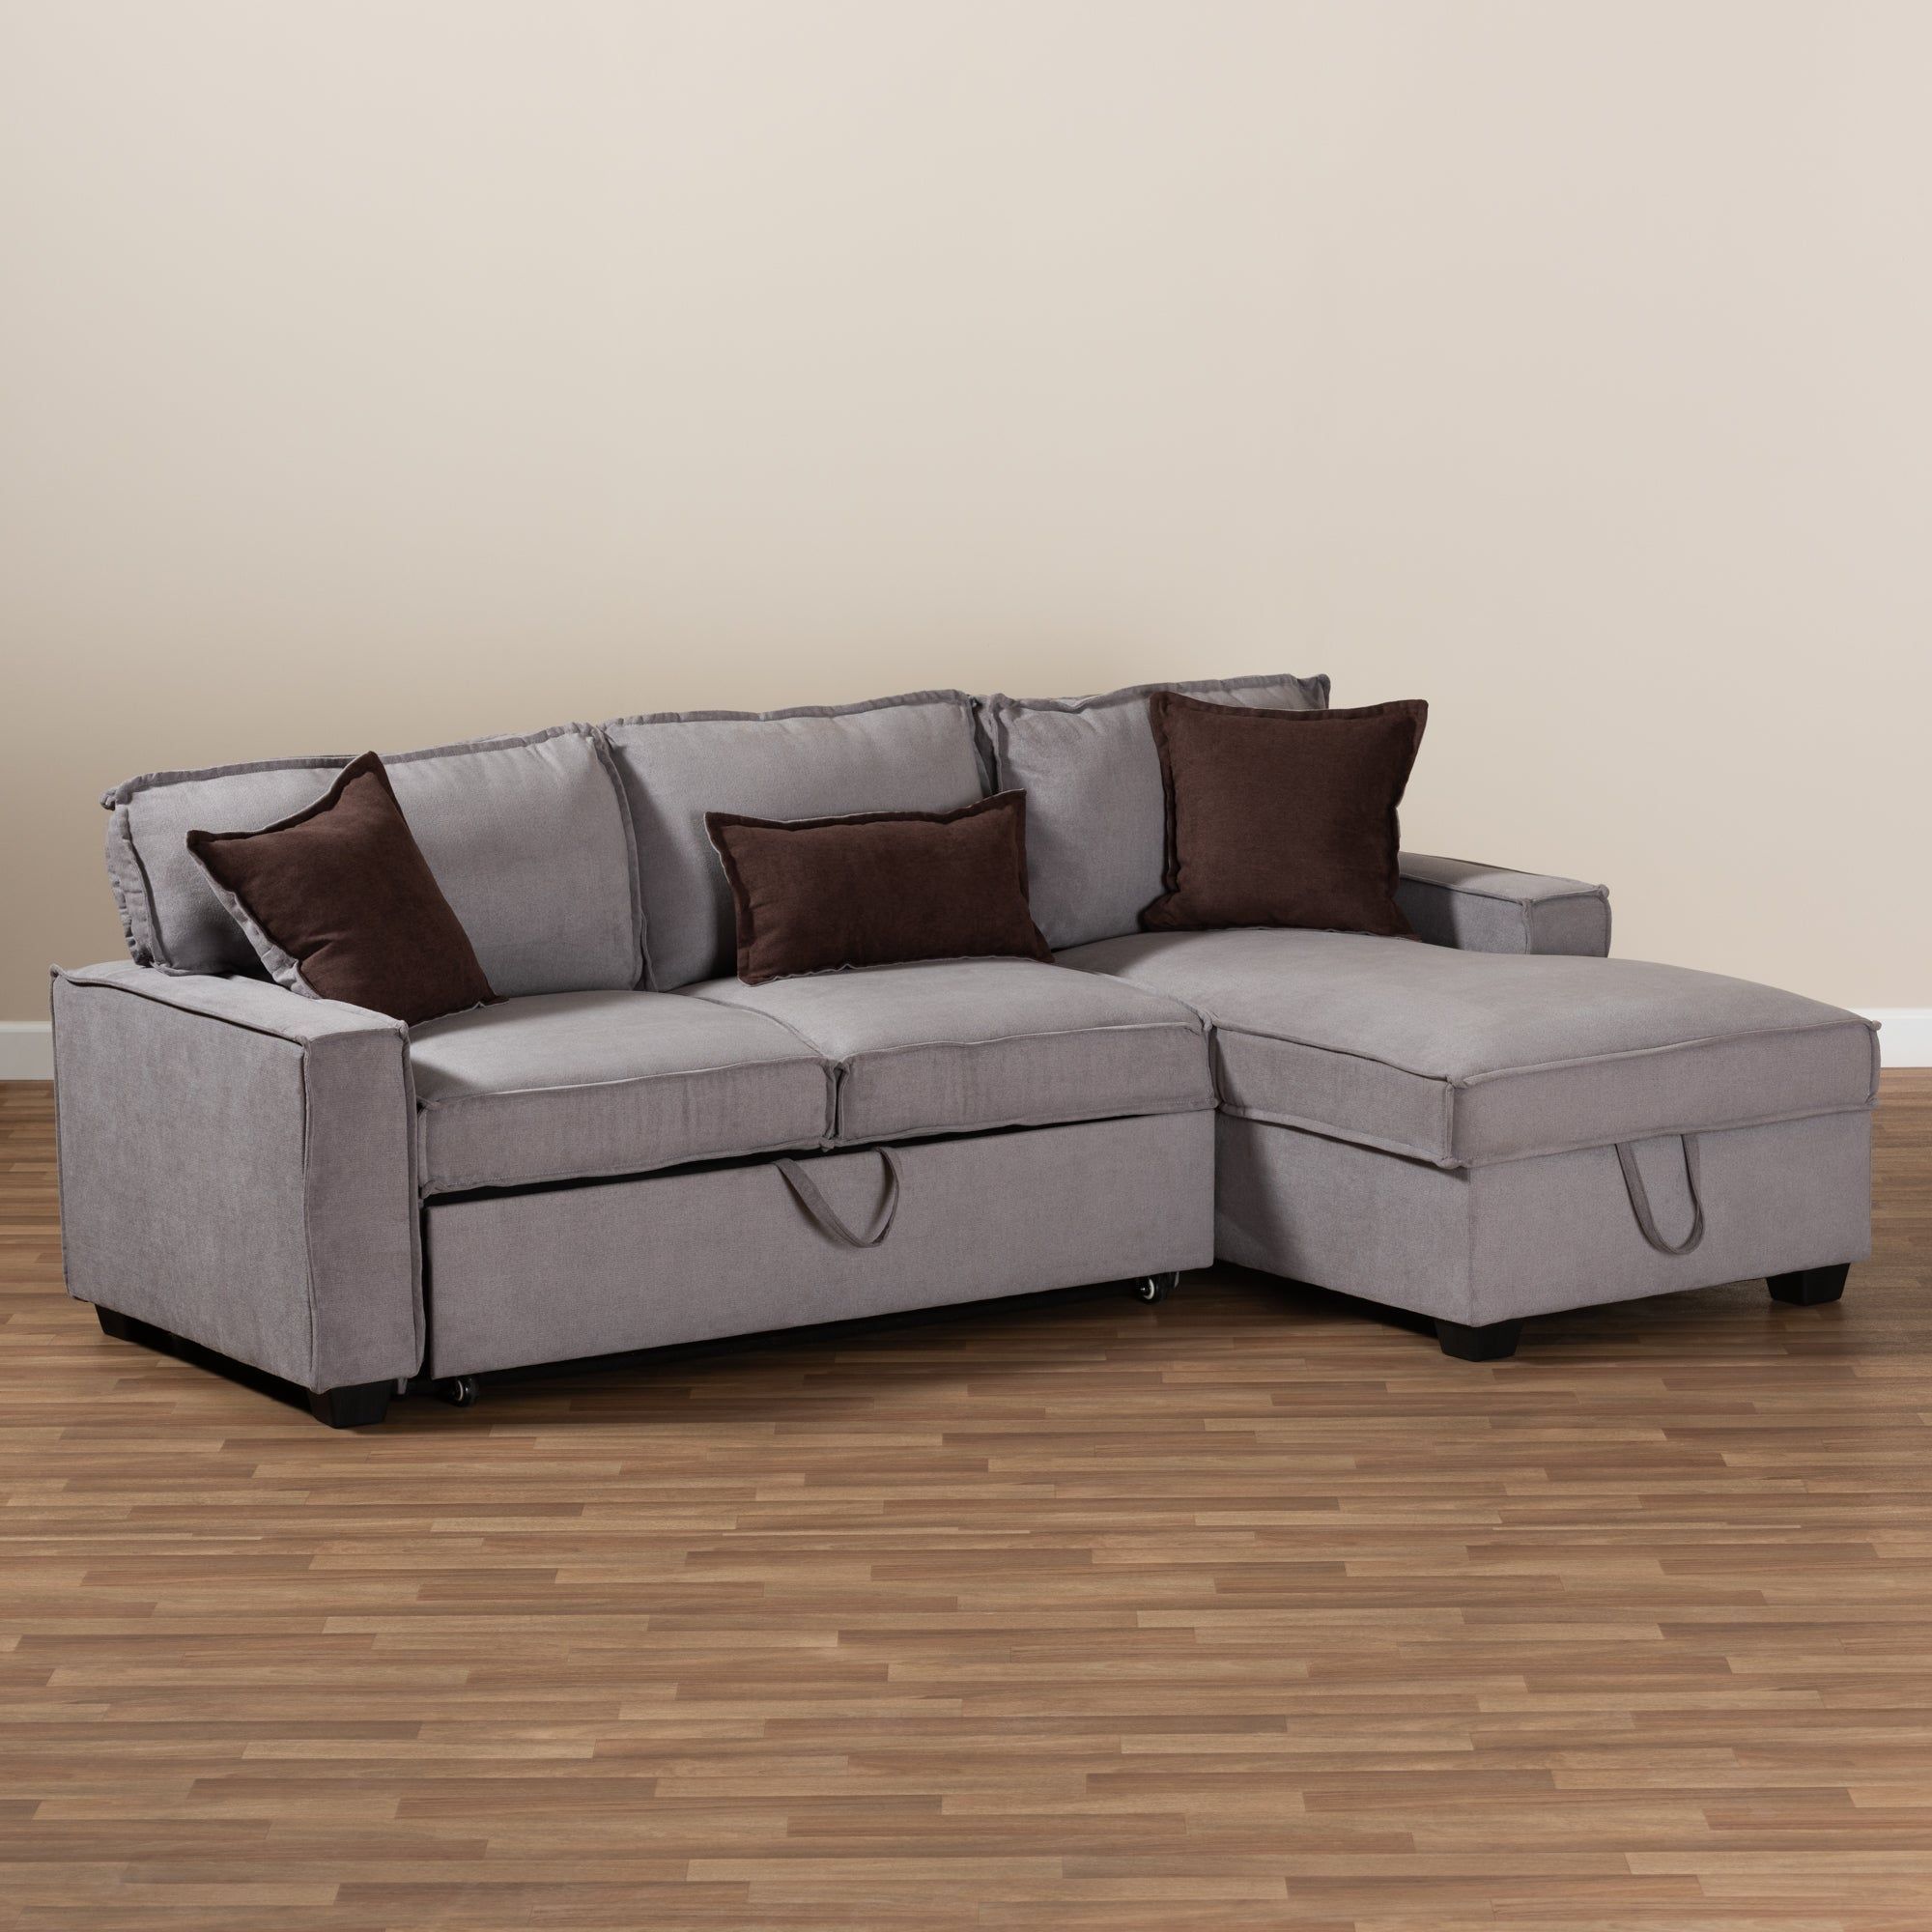 Functioning As A Sofa, Bed, And Storage All In One, The Emile Sofa Is A For Left Or Right Facing Sleeper Sectionals (View 16 of 21)